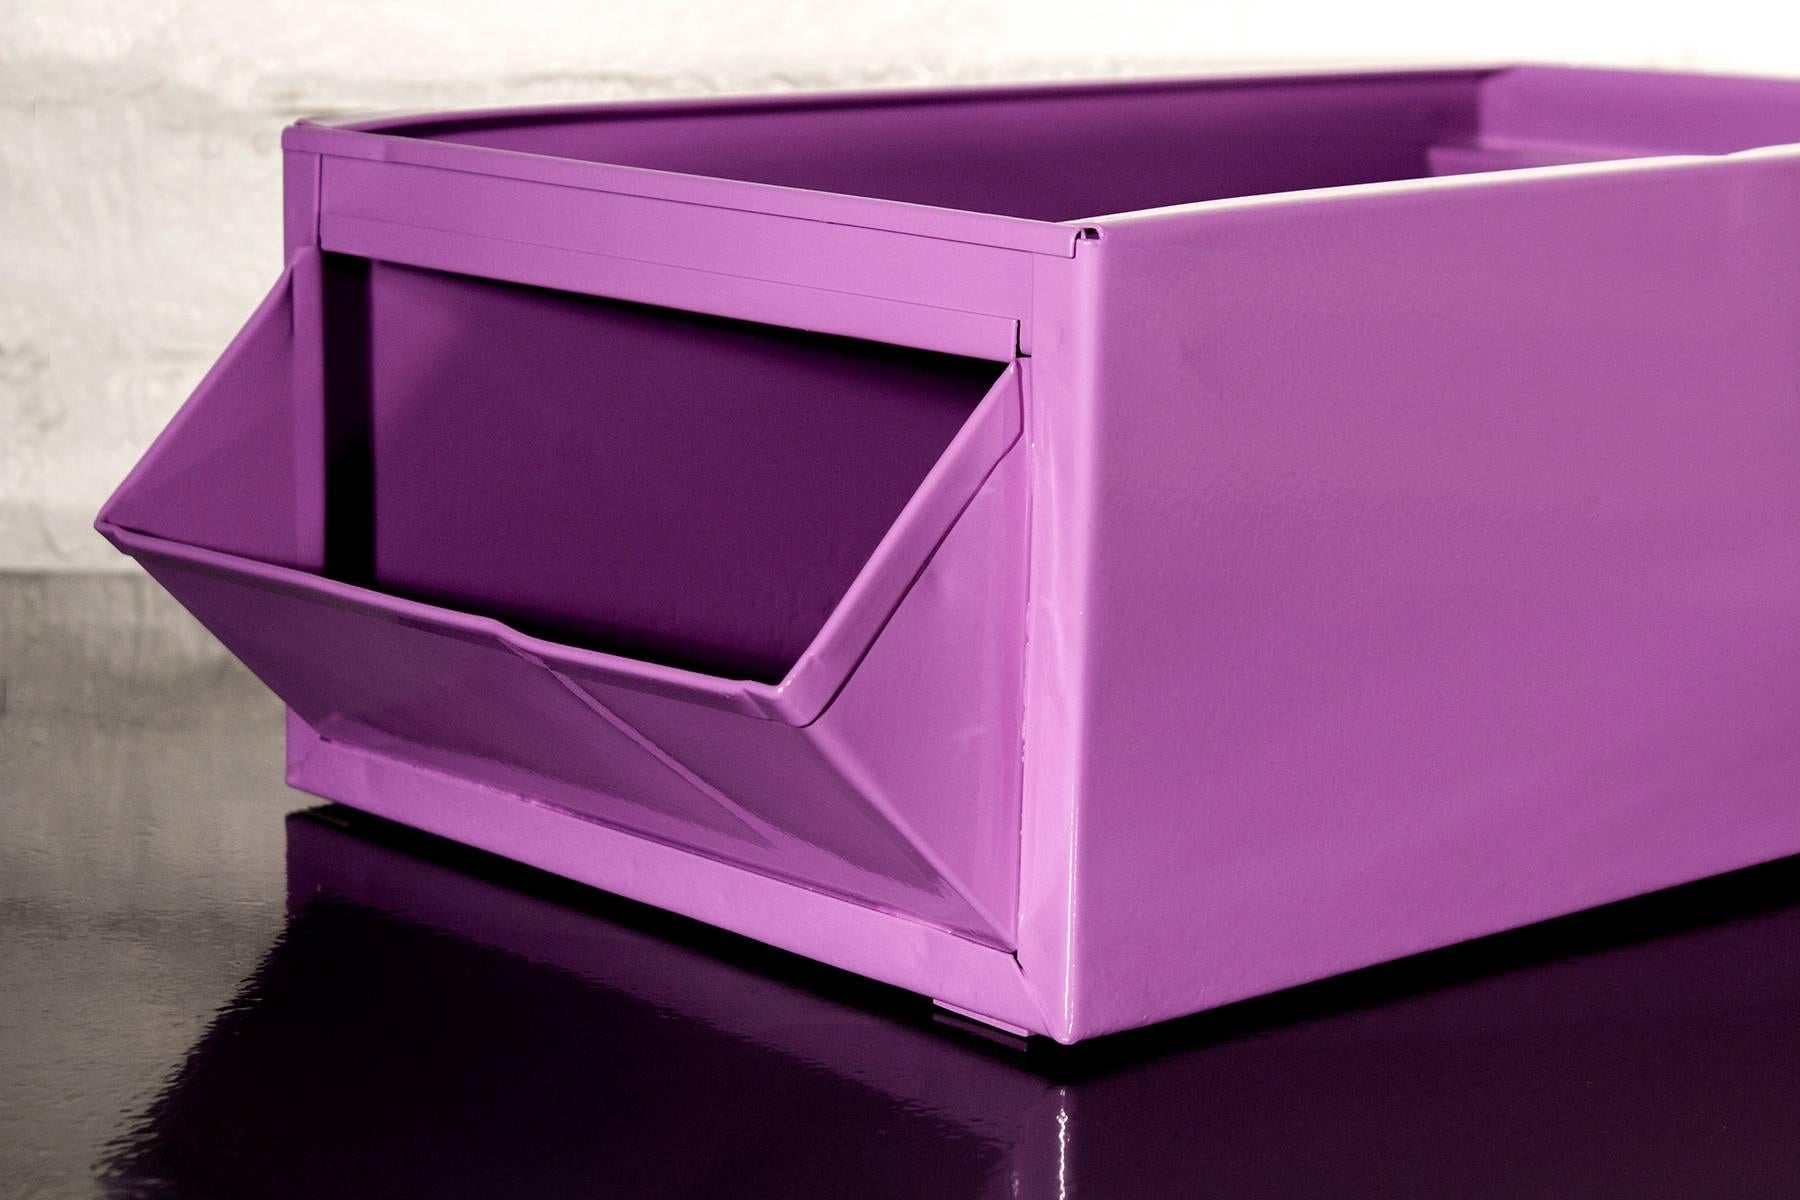 We refinished our 1940s industrial mail bin in a fresh gloss lilac powder coat. This classic, heavy-duty steel organizer is sure to keep your retro office in tip-top shape.